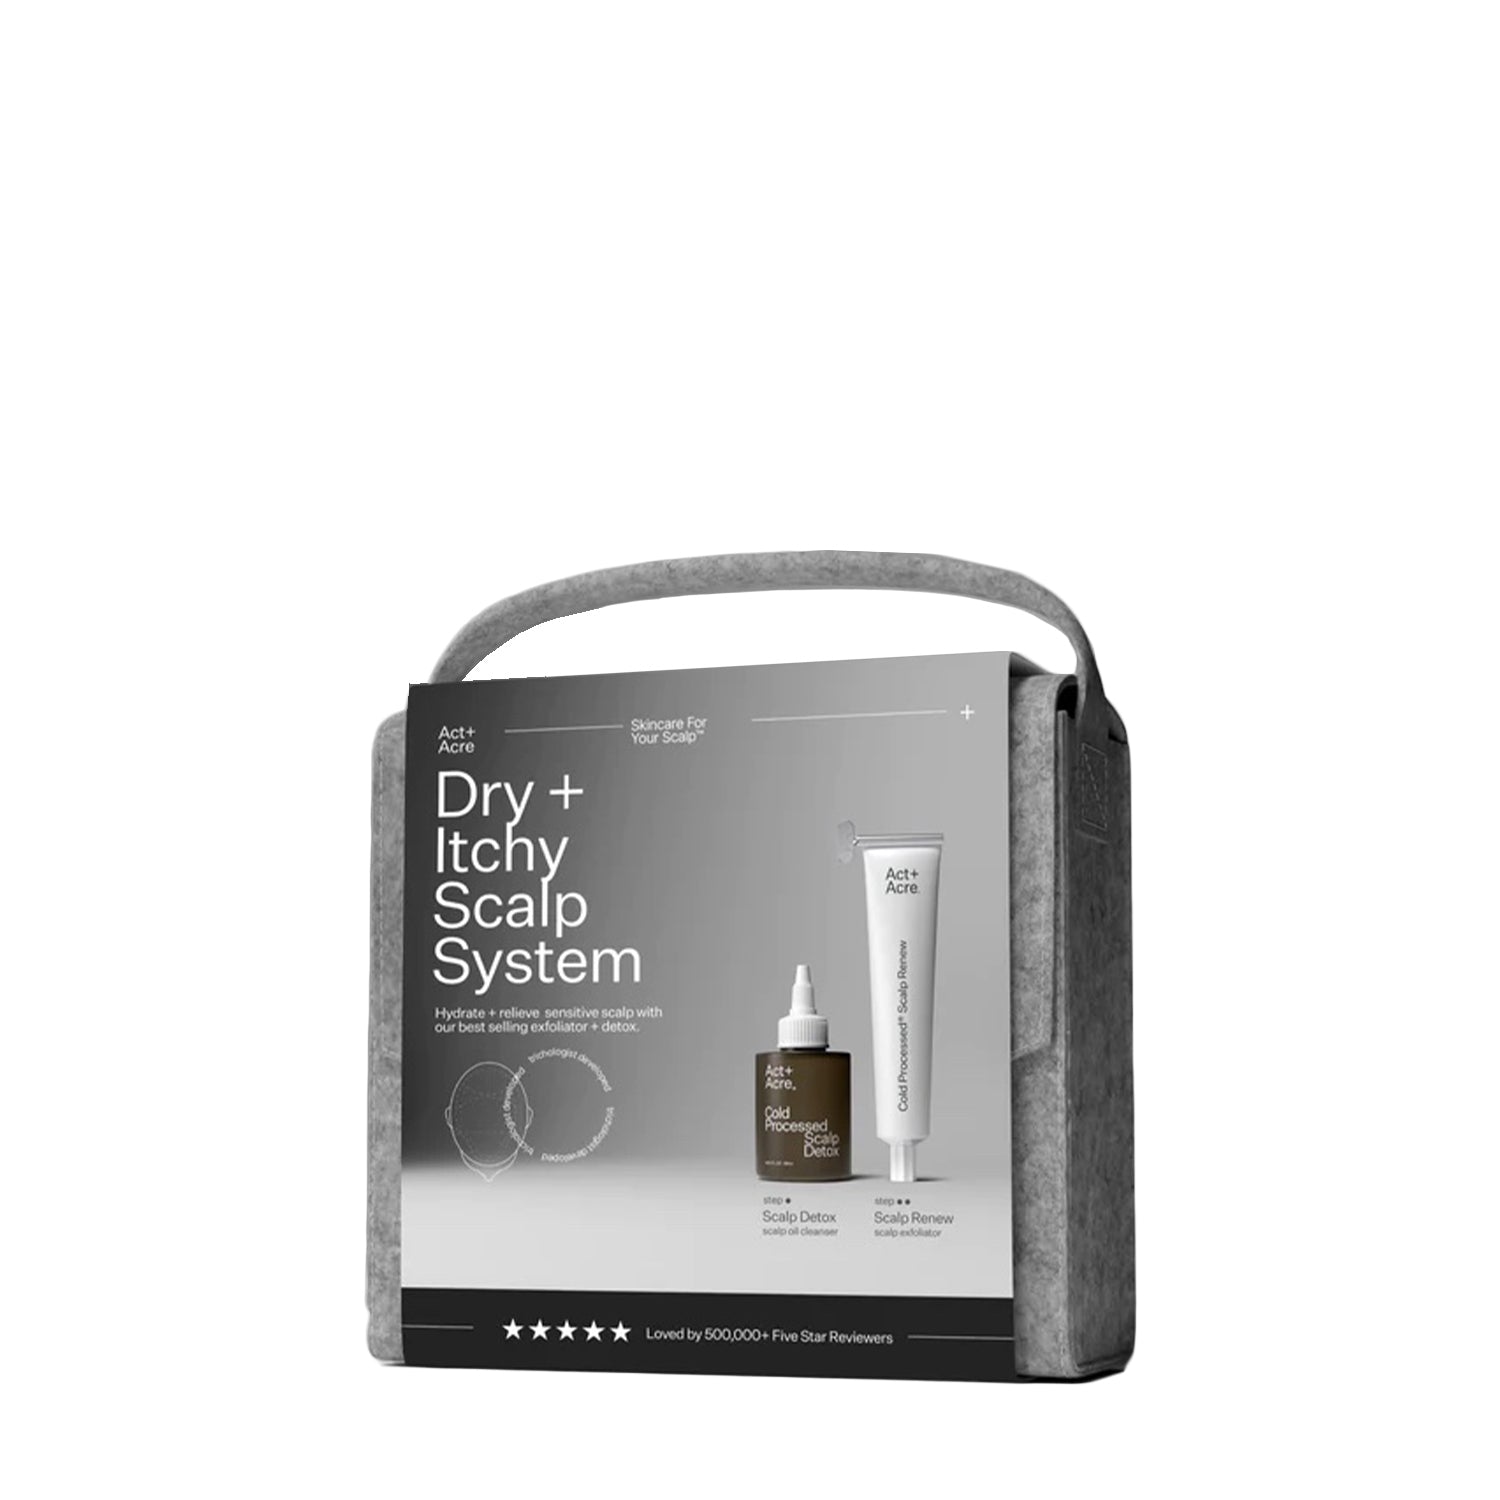 Dry + Itchy Scalp System Set